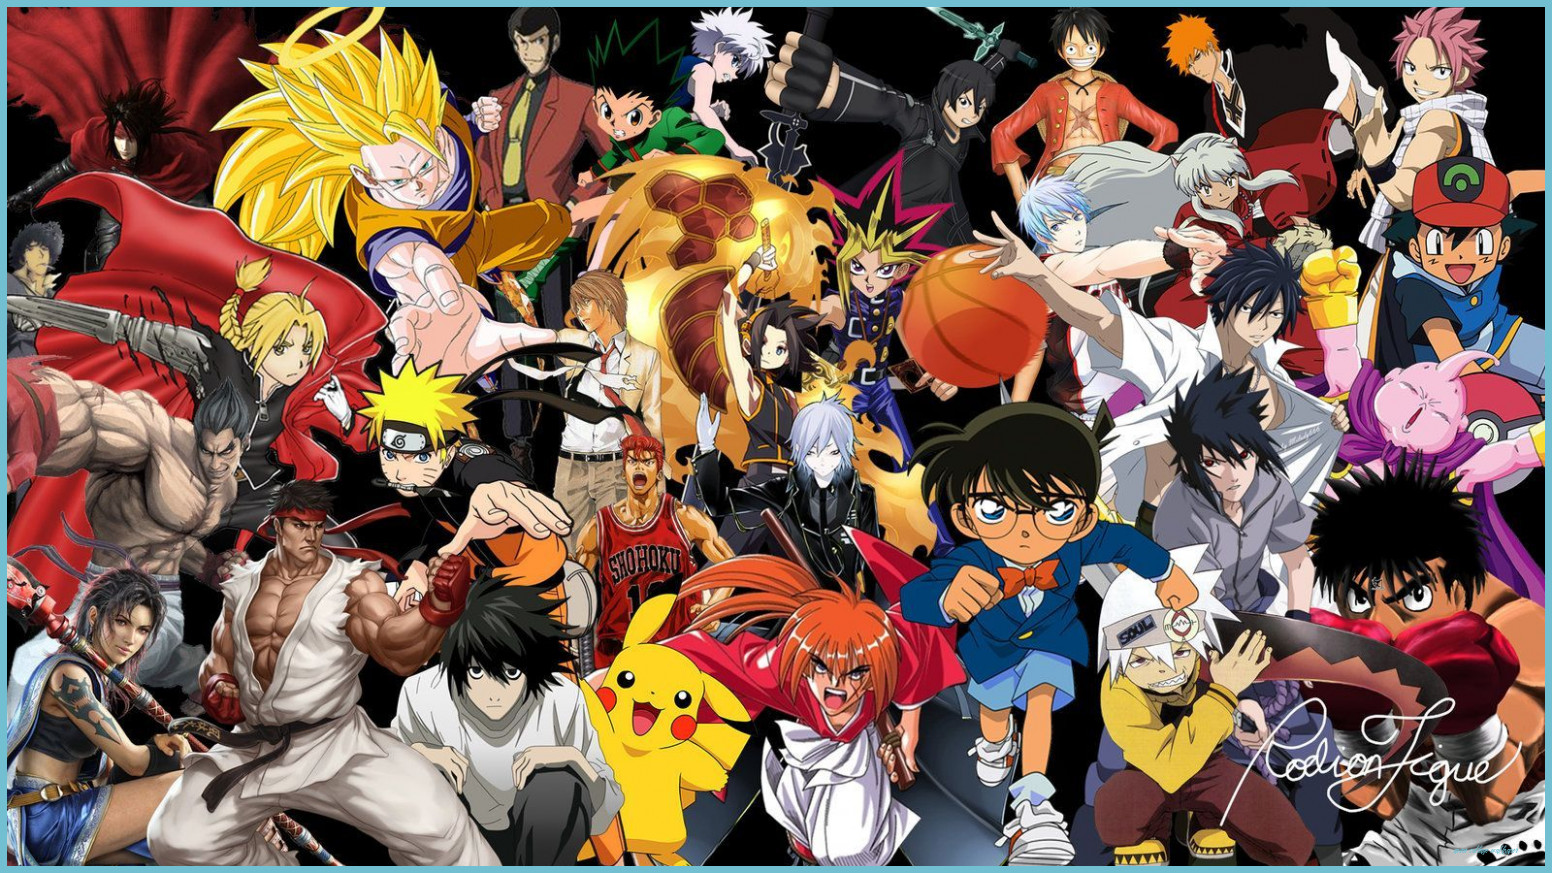 Anime Collage Wallpaper Free Anime Collage Background Collage Wallpaper